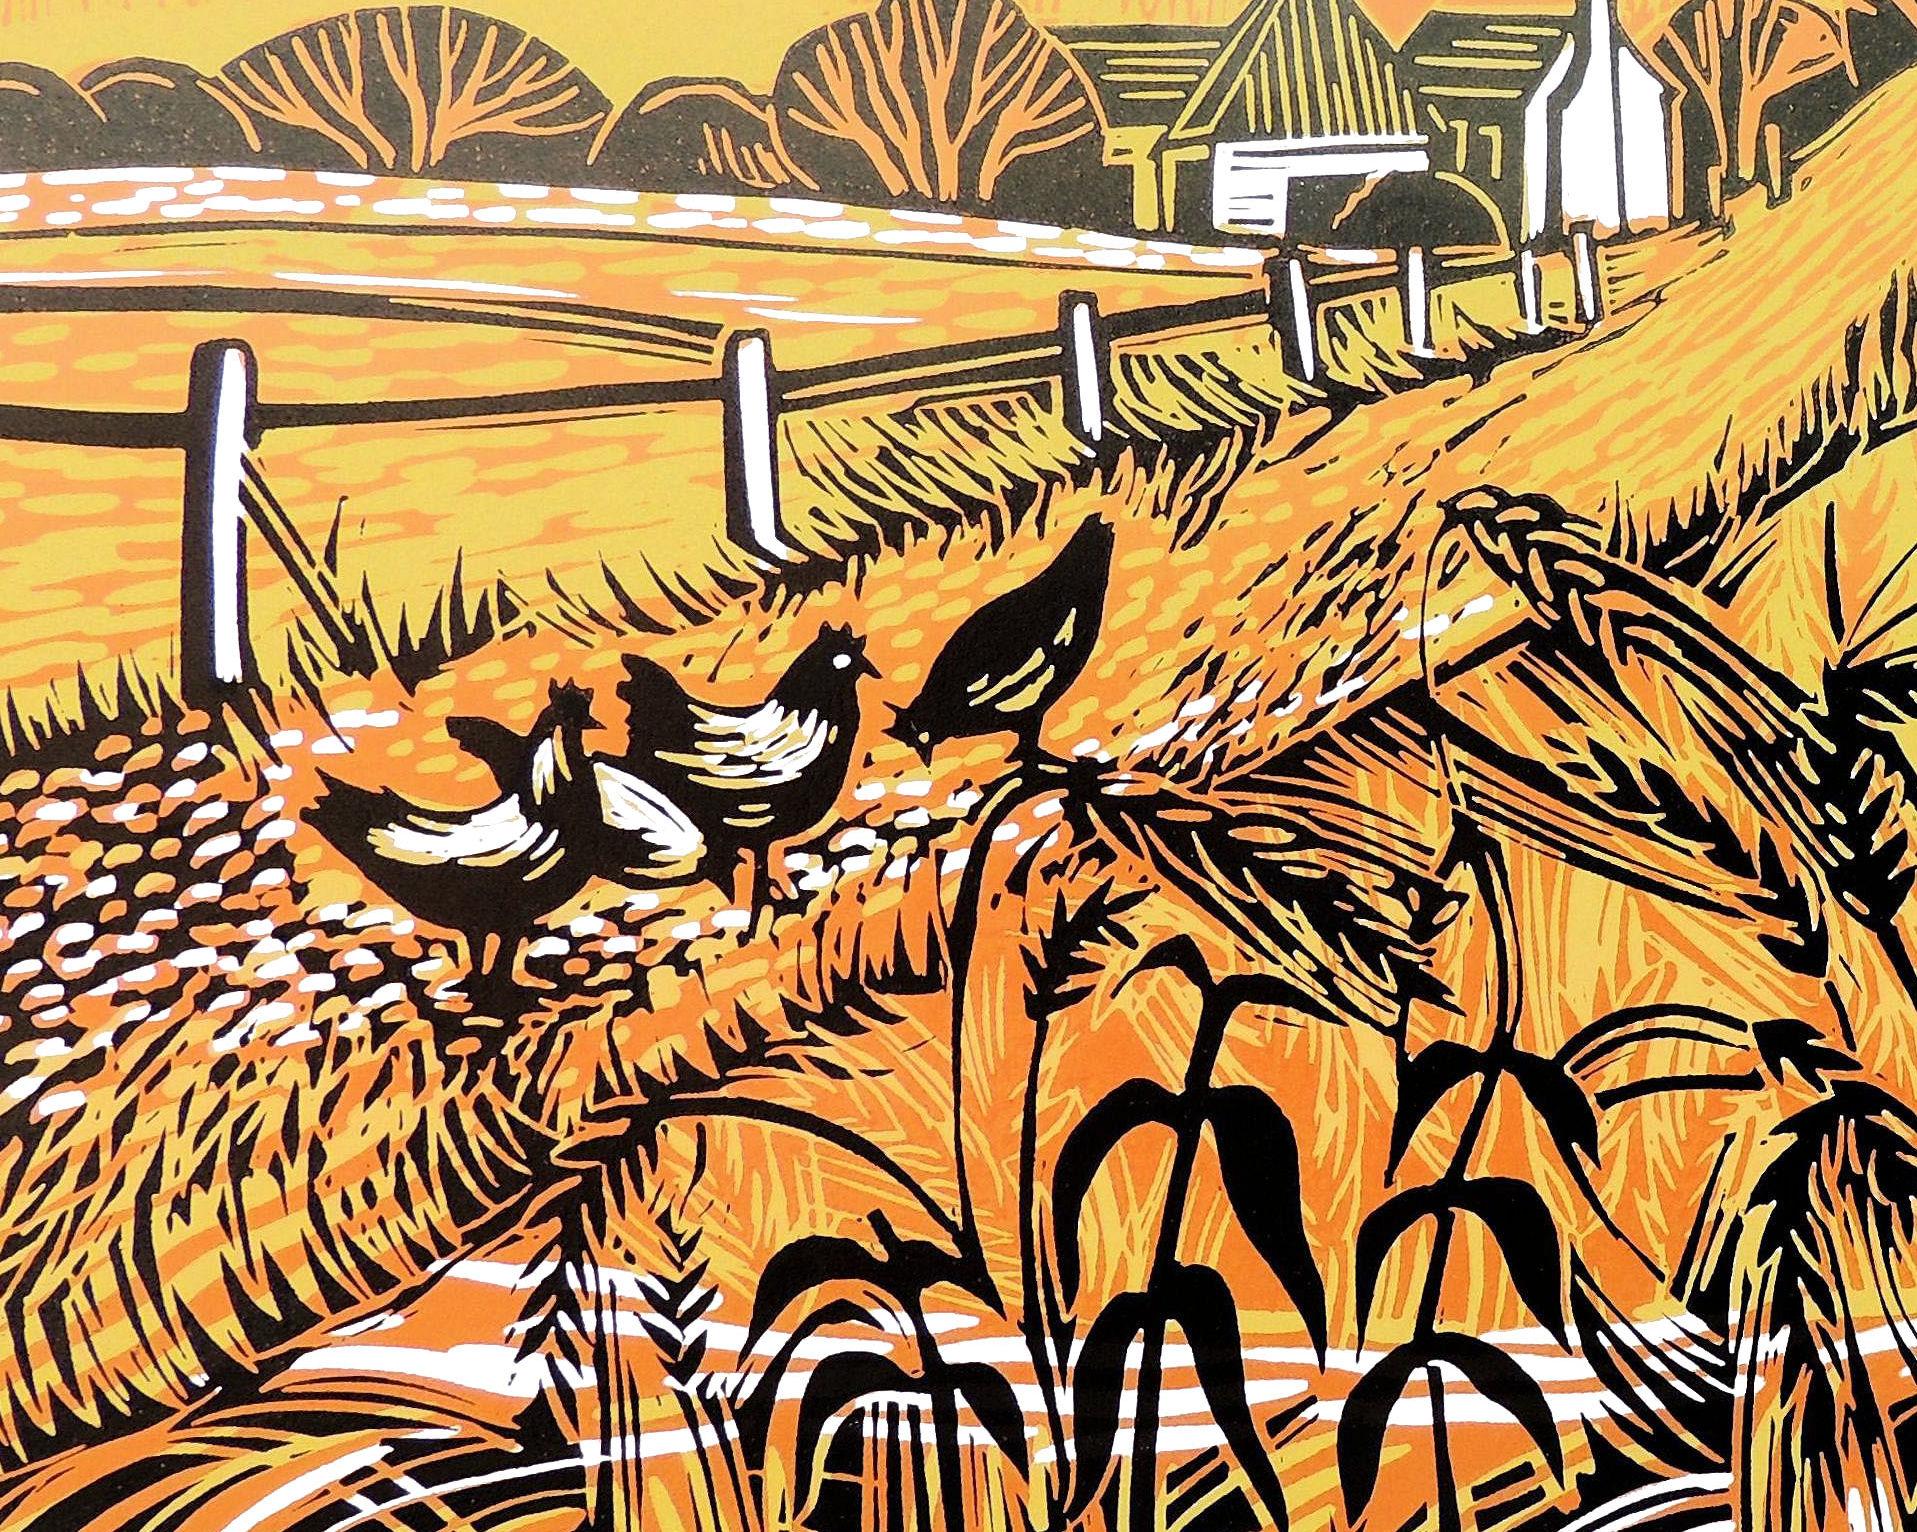 In this linocut I was trying to create movement and a warm range iof colours. The cutting is intended to be vigorous with ears of wheat in the foreground against a setting sun.

Rob Barnes, artist, is available for sale online and in our art gallery